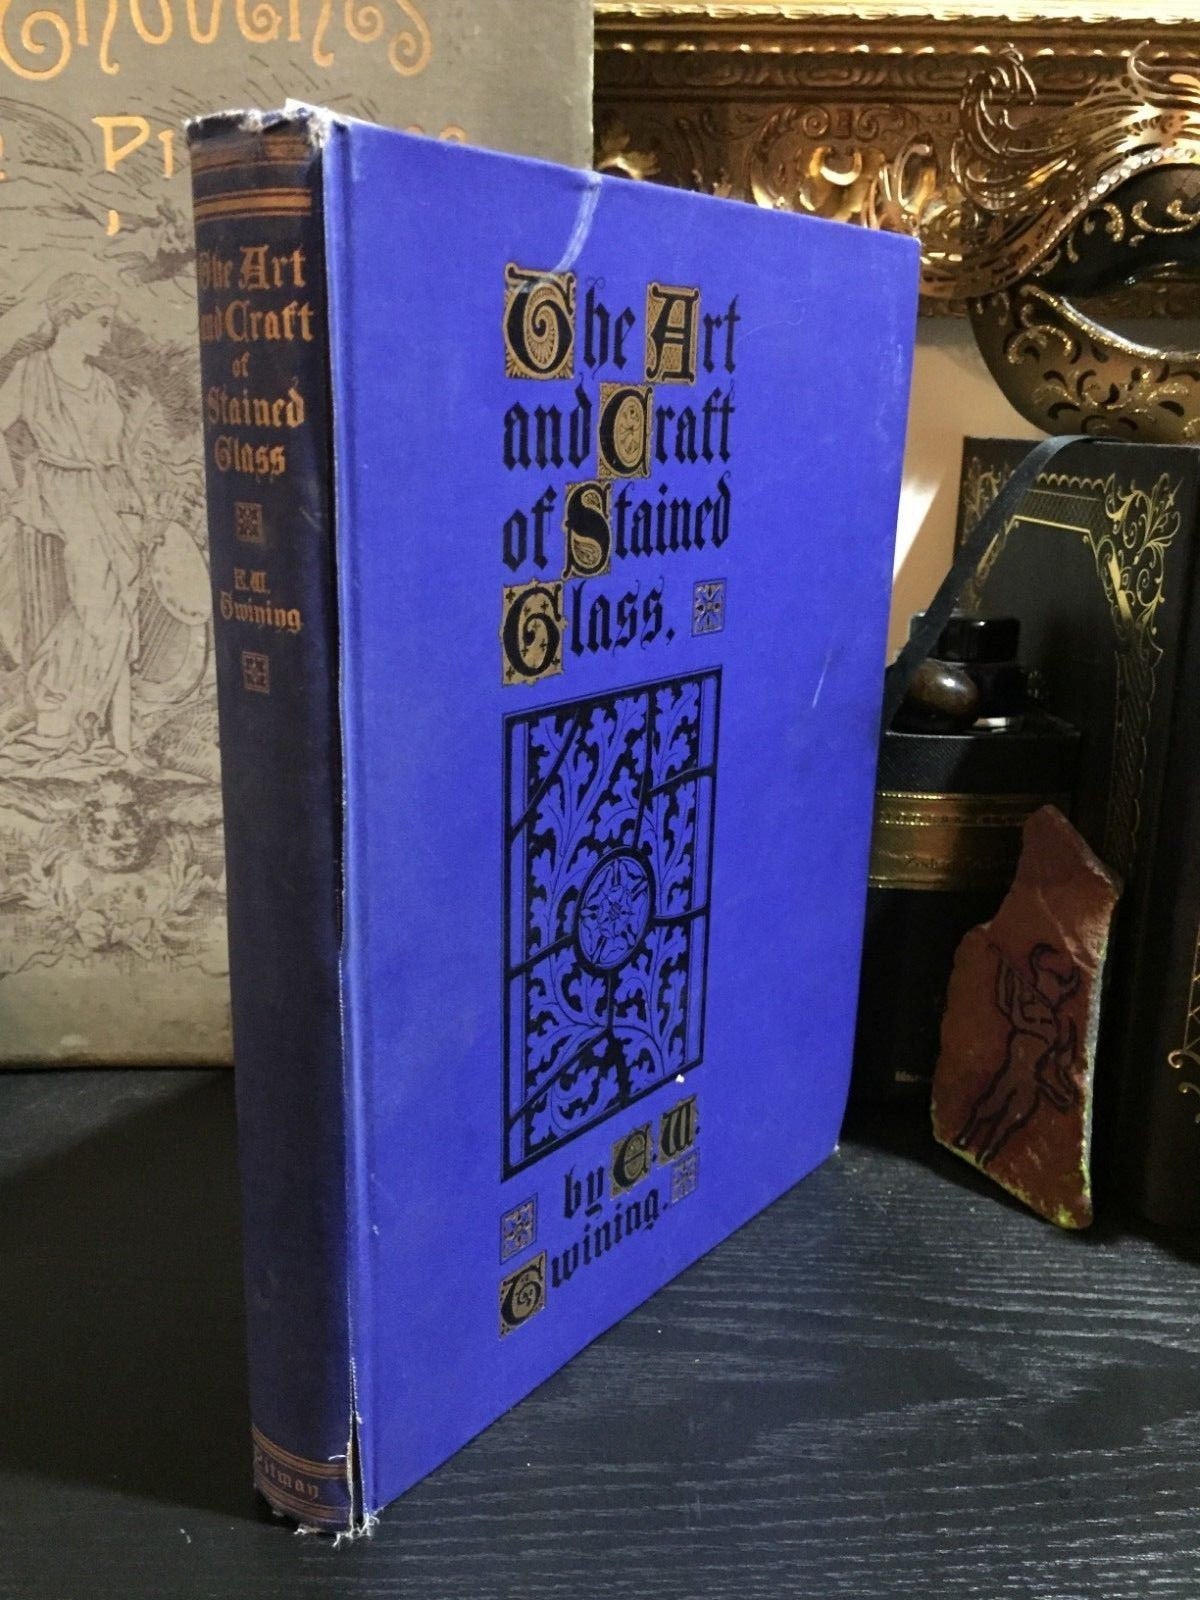 The Art and Craft of Stained Glass, E.W. Twining, Illustrated, 1st. Ed., 1928